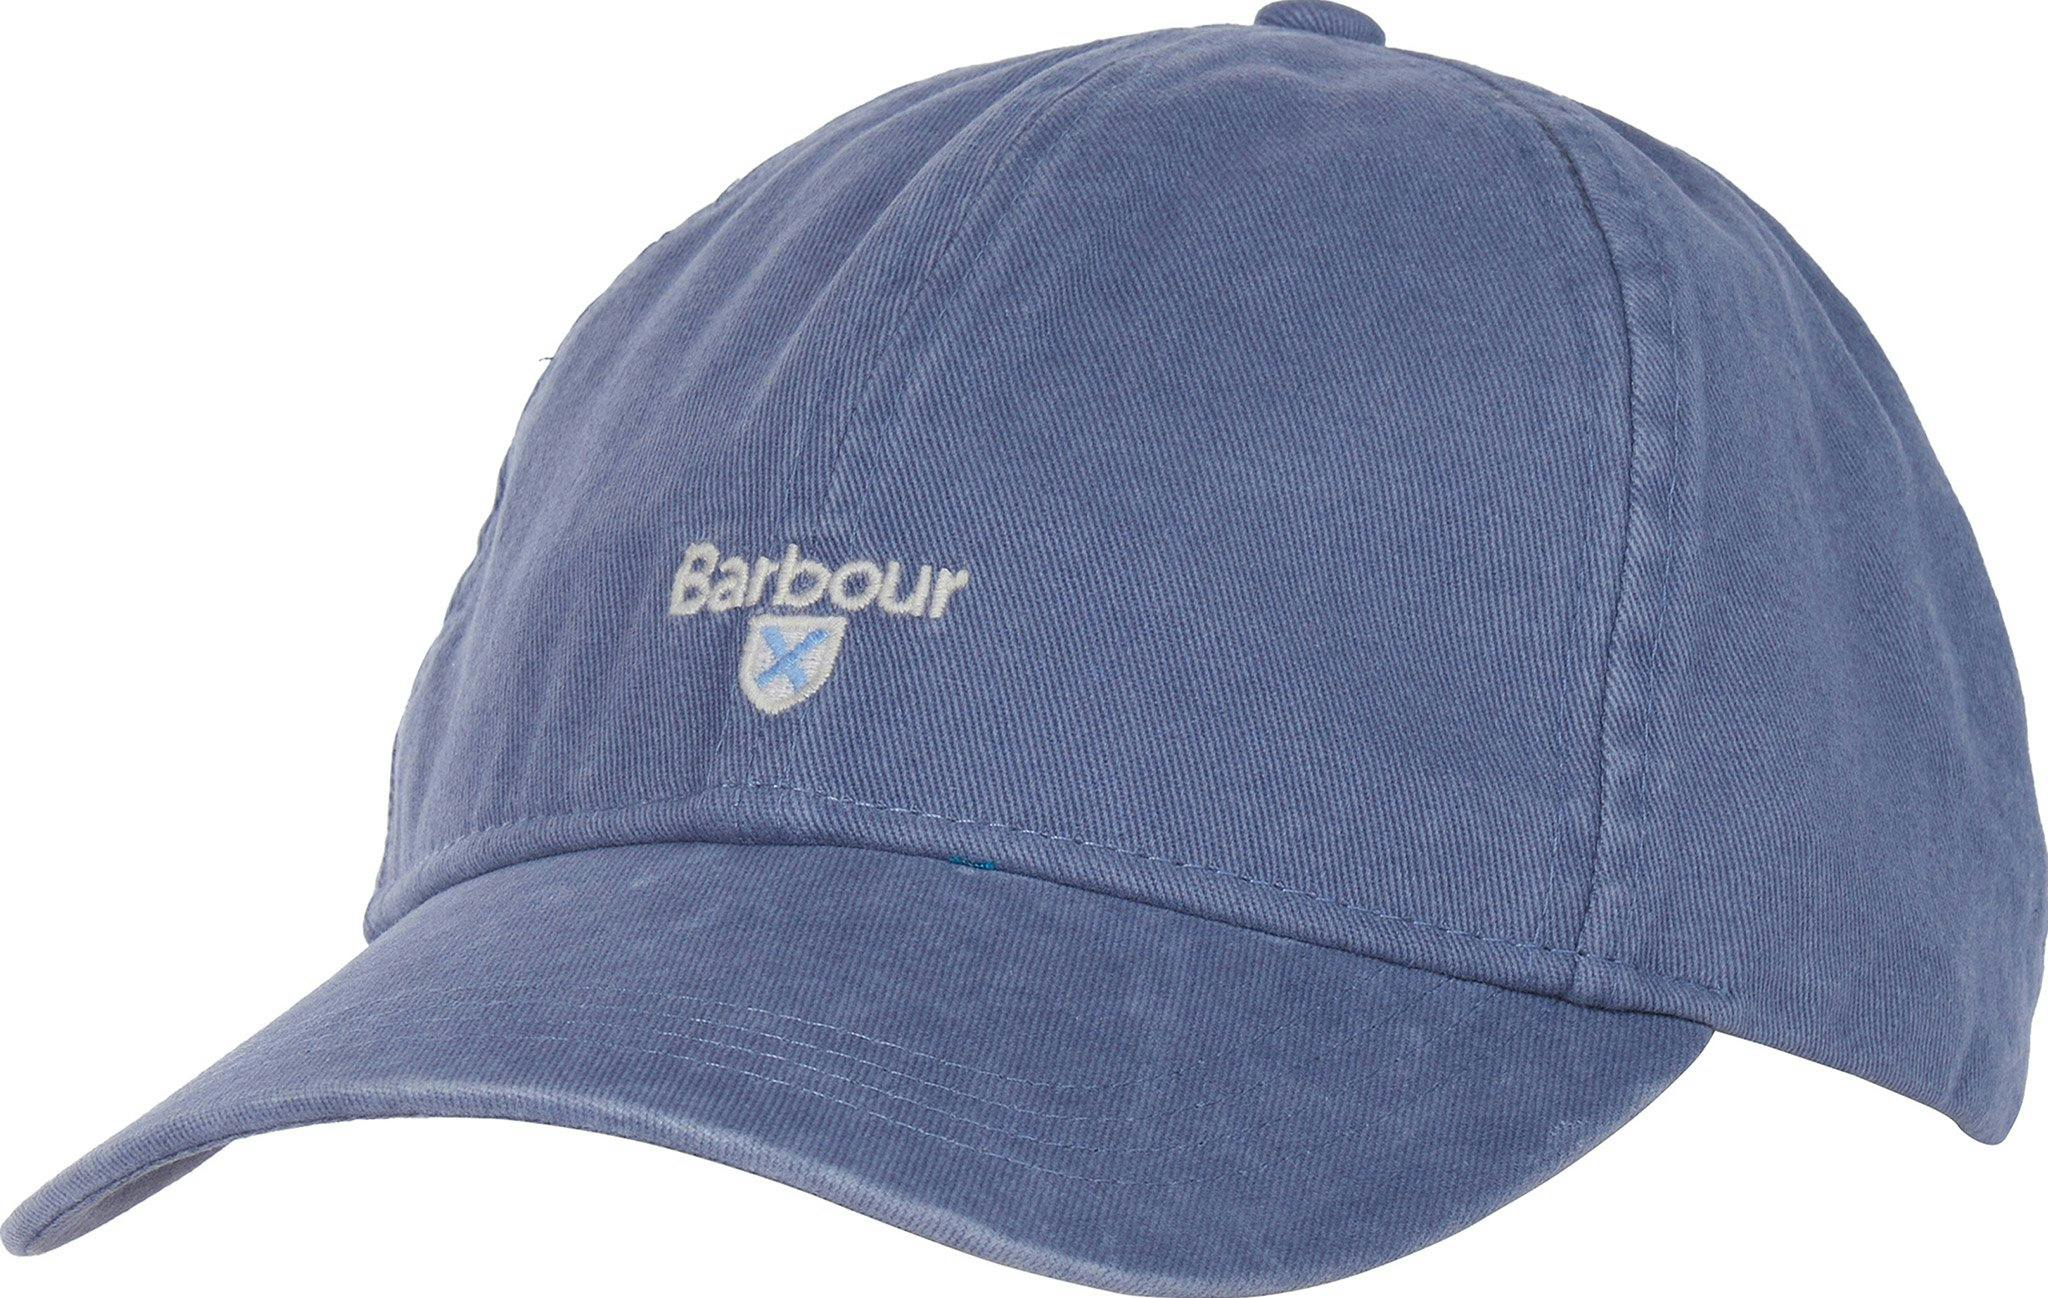 Product image for Cascade Sports Cap - Men's